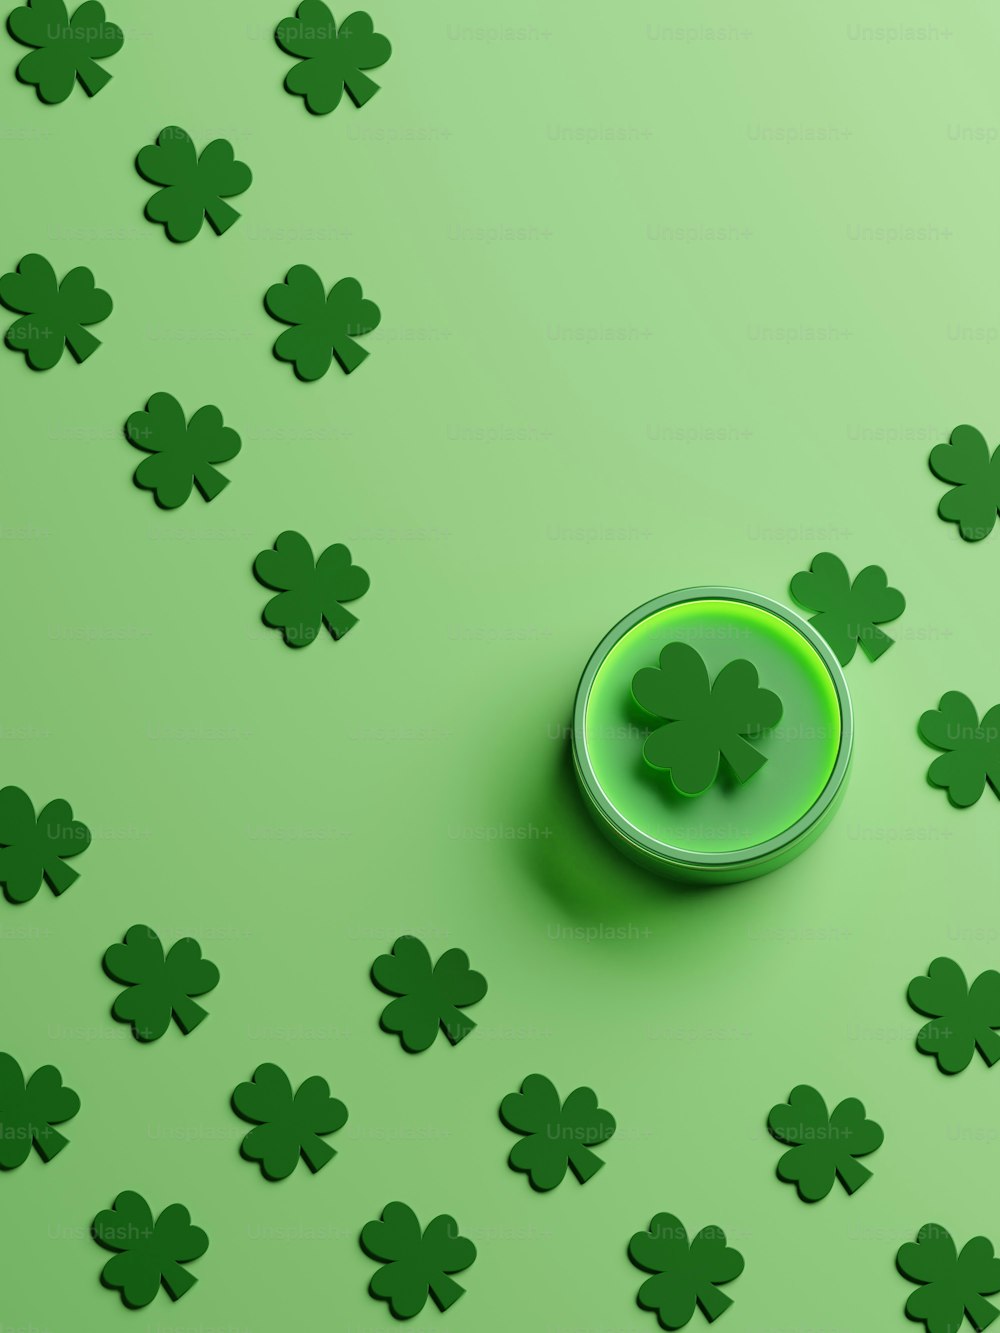 a green button surrounded by green shamrocks